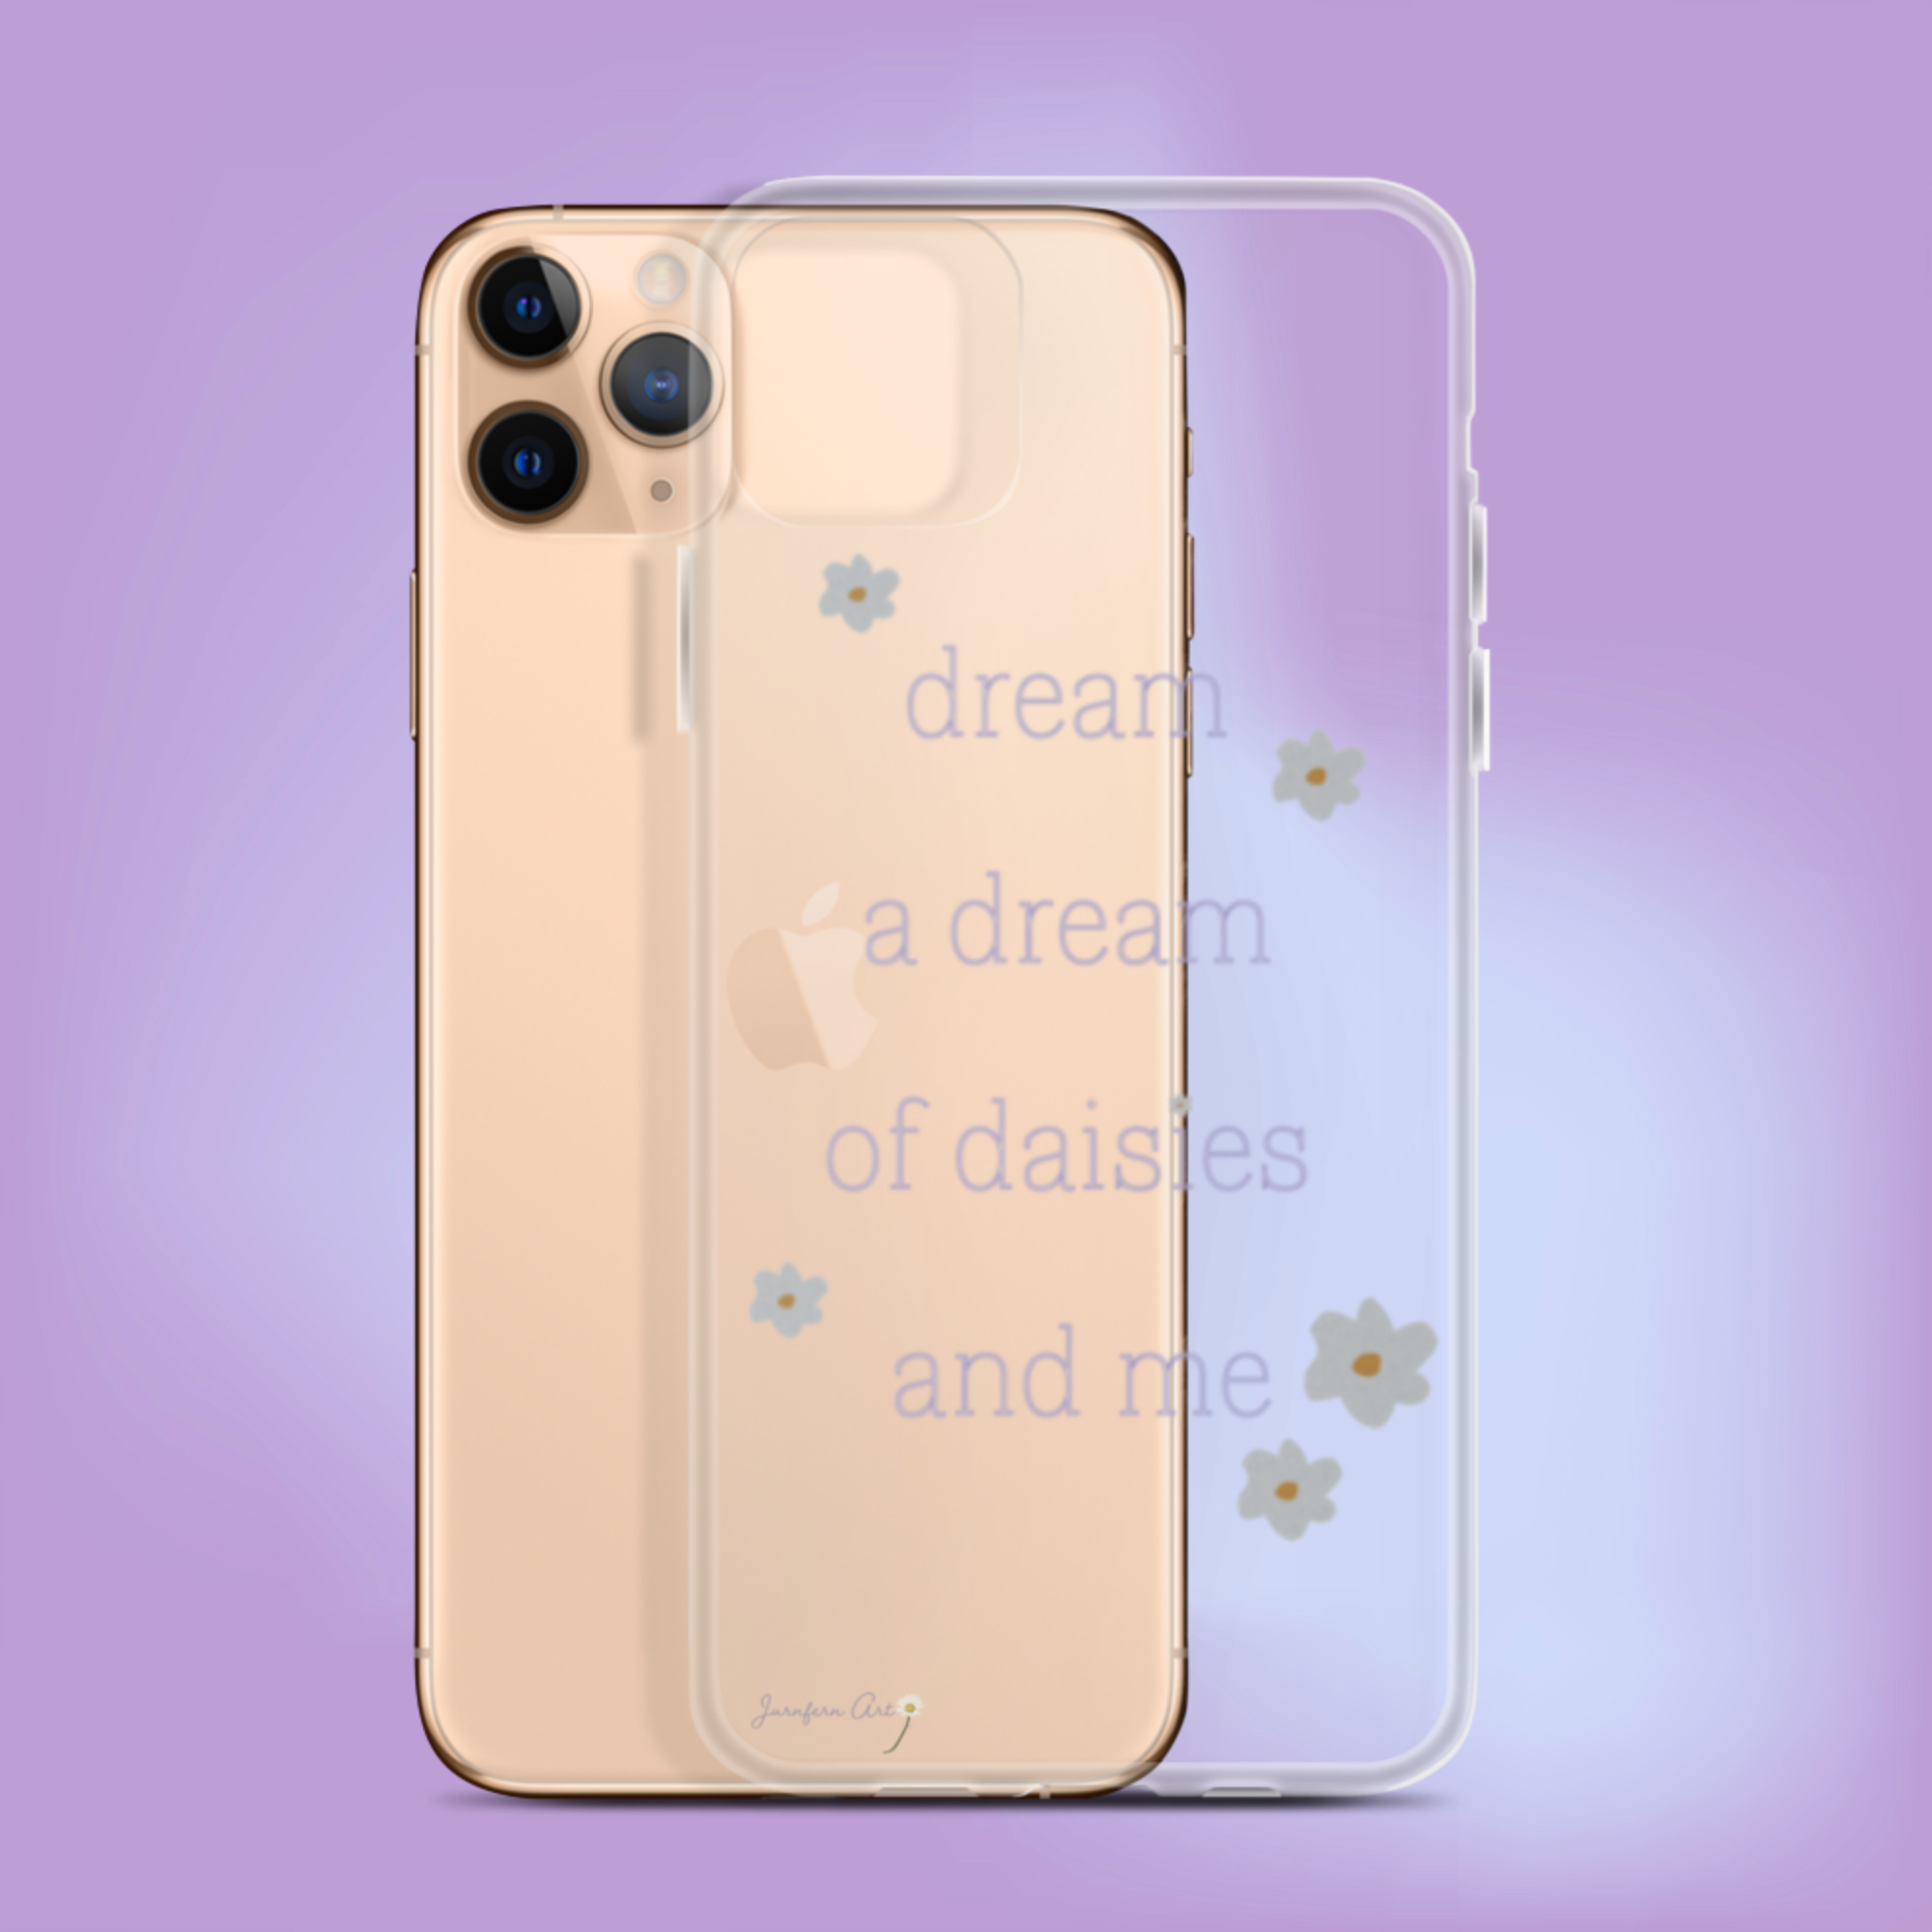 A transparent iPhone 11 case with lavender text on it that reads "dream a dream of daisies and me" surrounded by small daisies